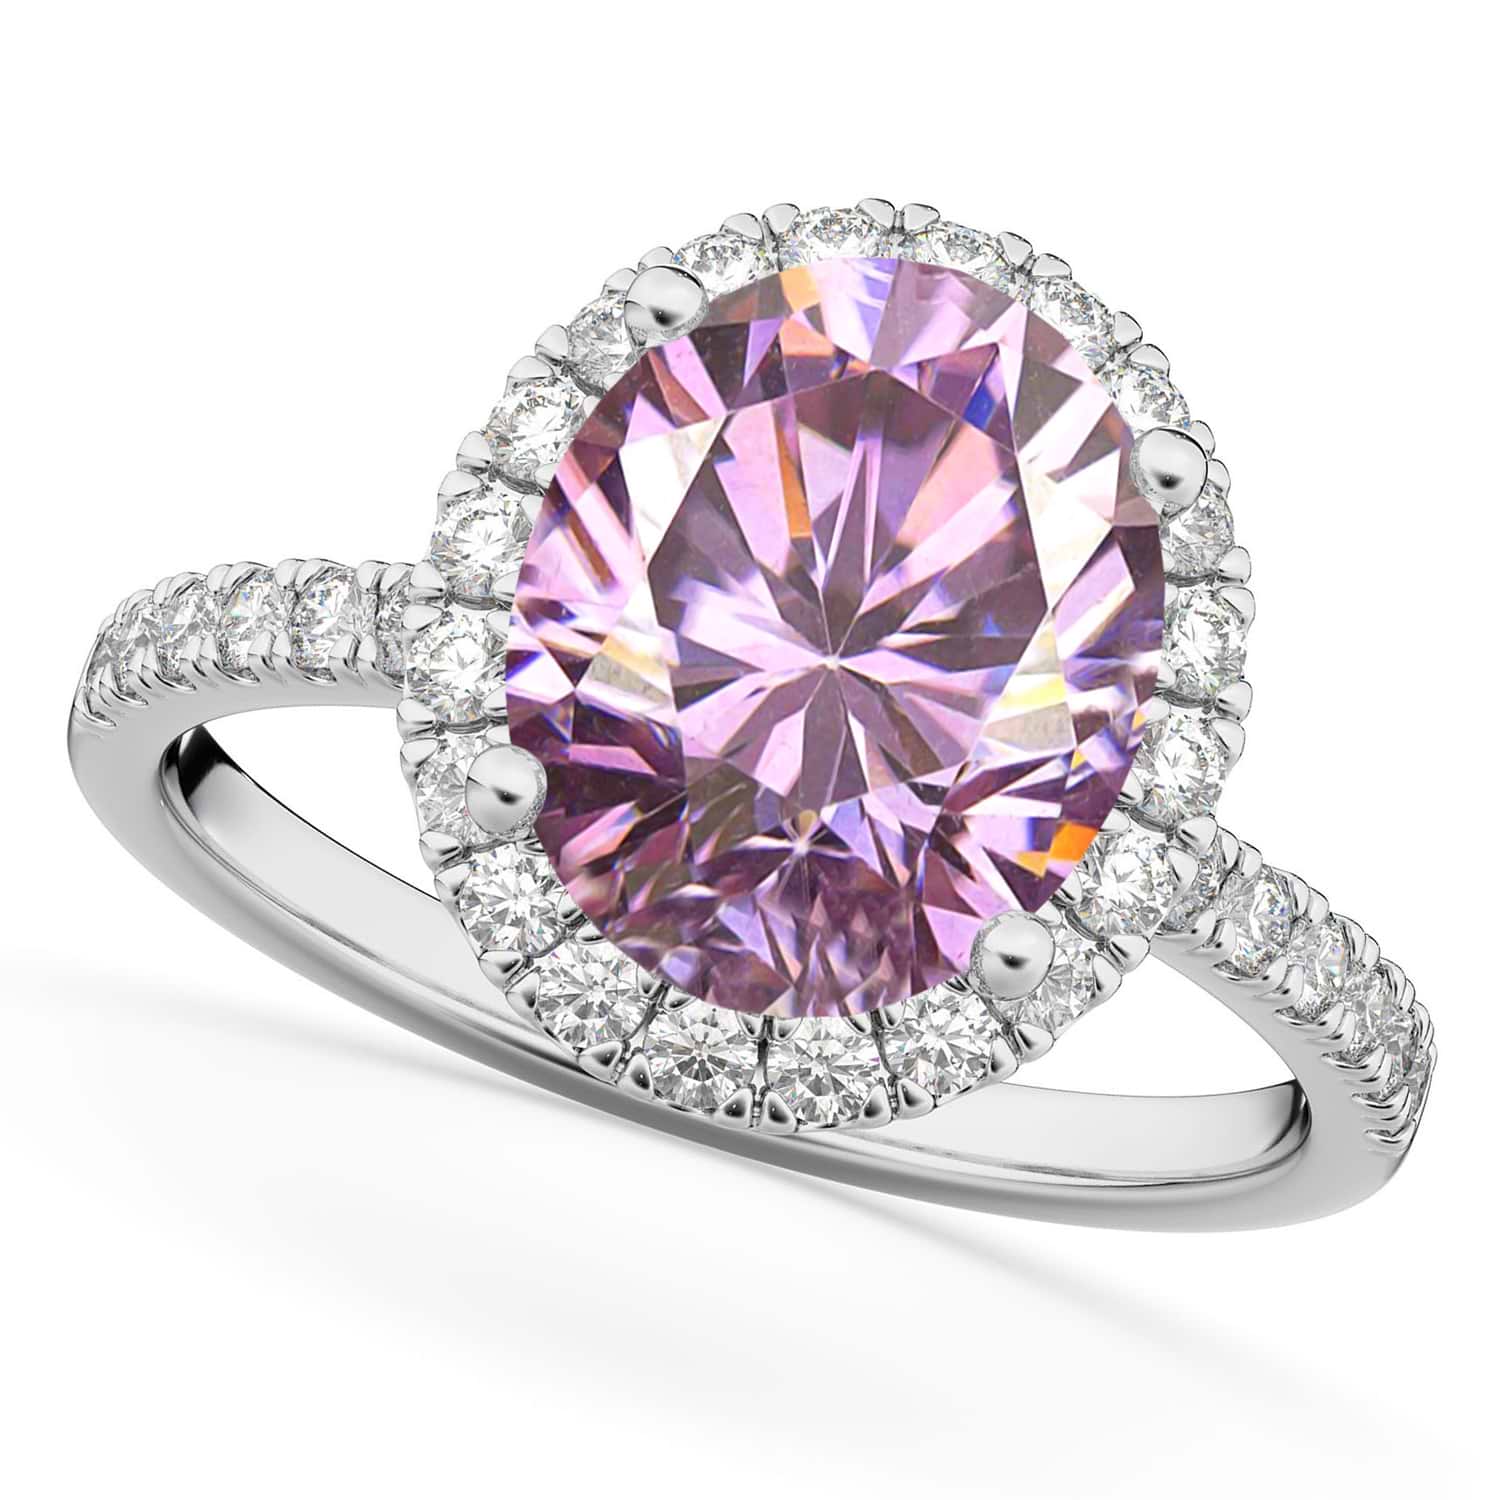 Oval Cut Halo Pink Moissanite & Diamond Engagement Ring 14K White Gold 2.72ct